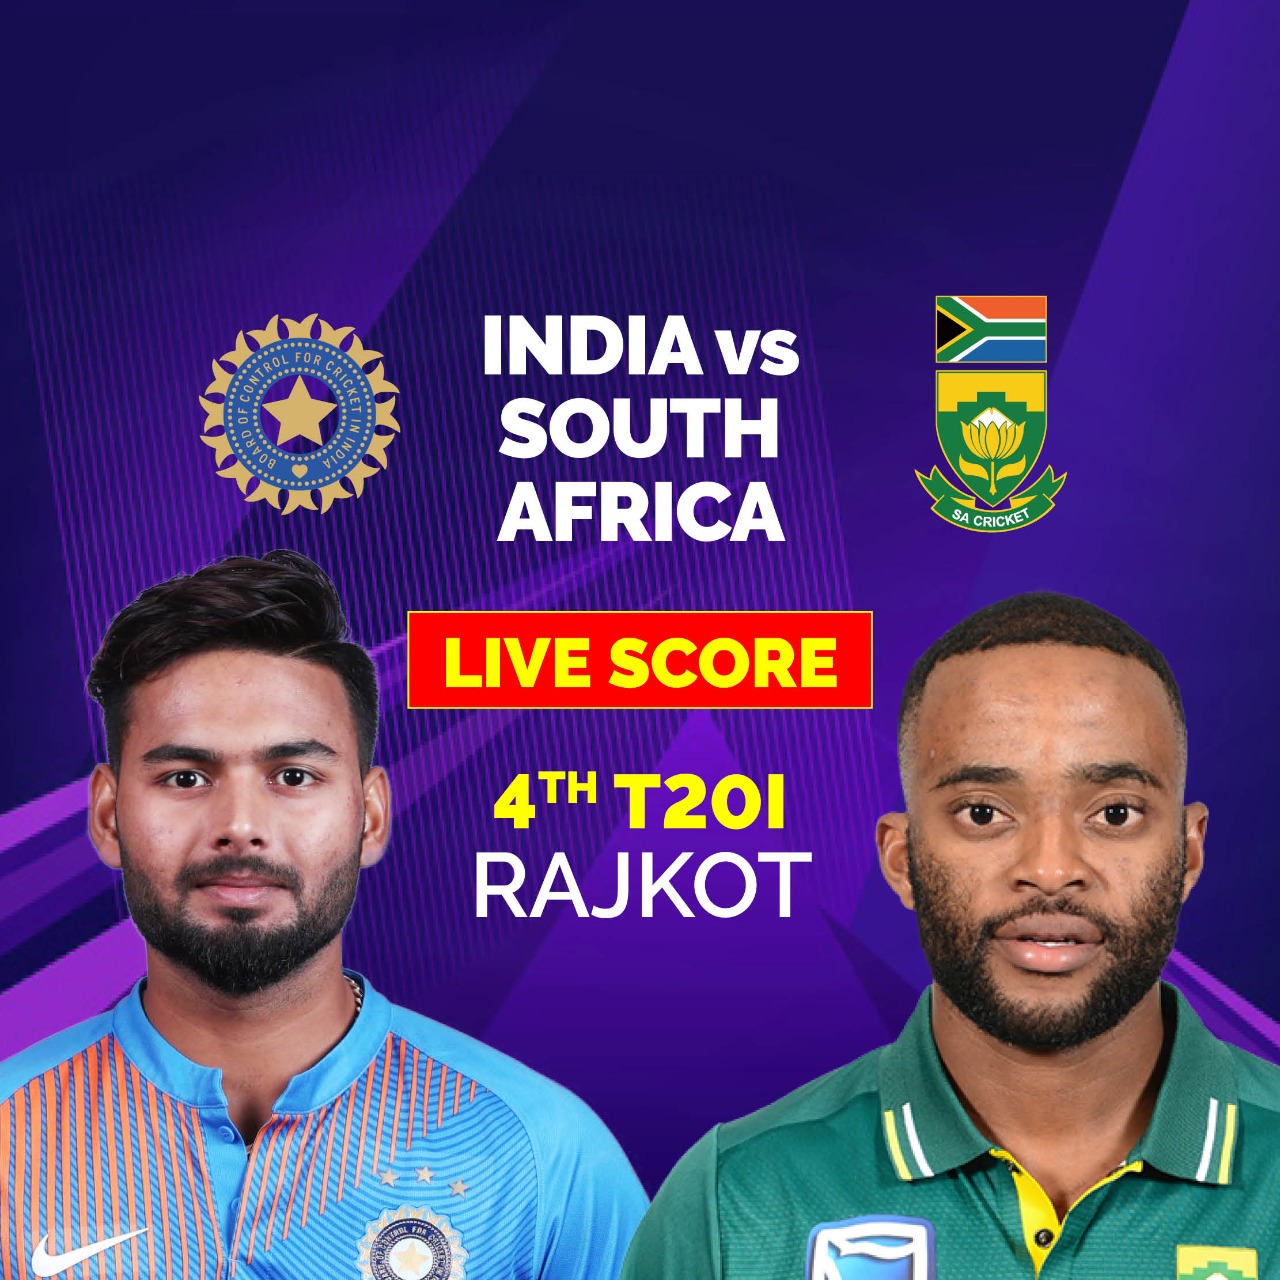 India vs South Africa 4th T20I Highlights IND Level Series in Rajkot With 82 Run Win